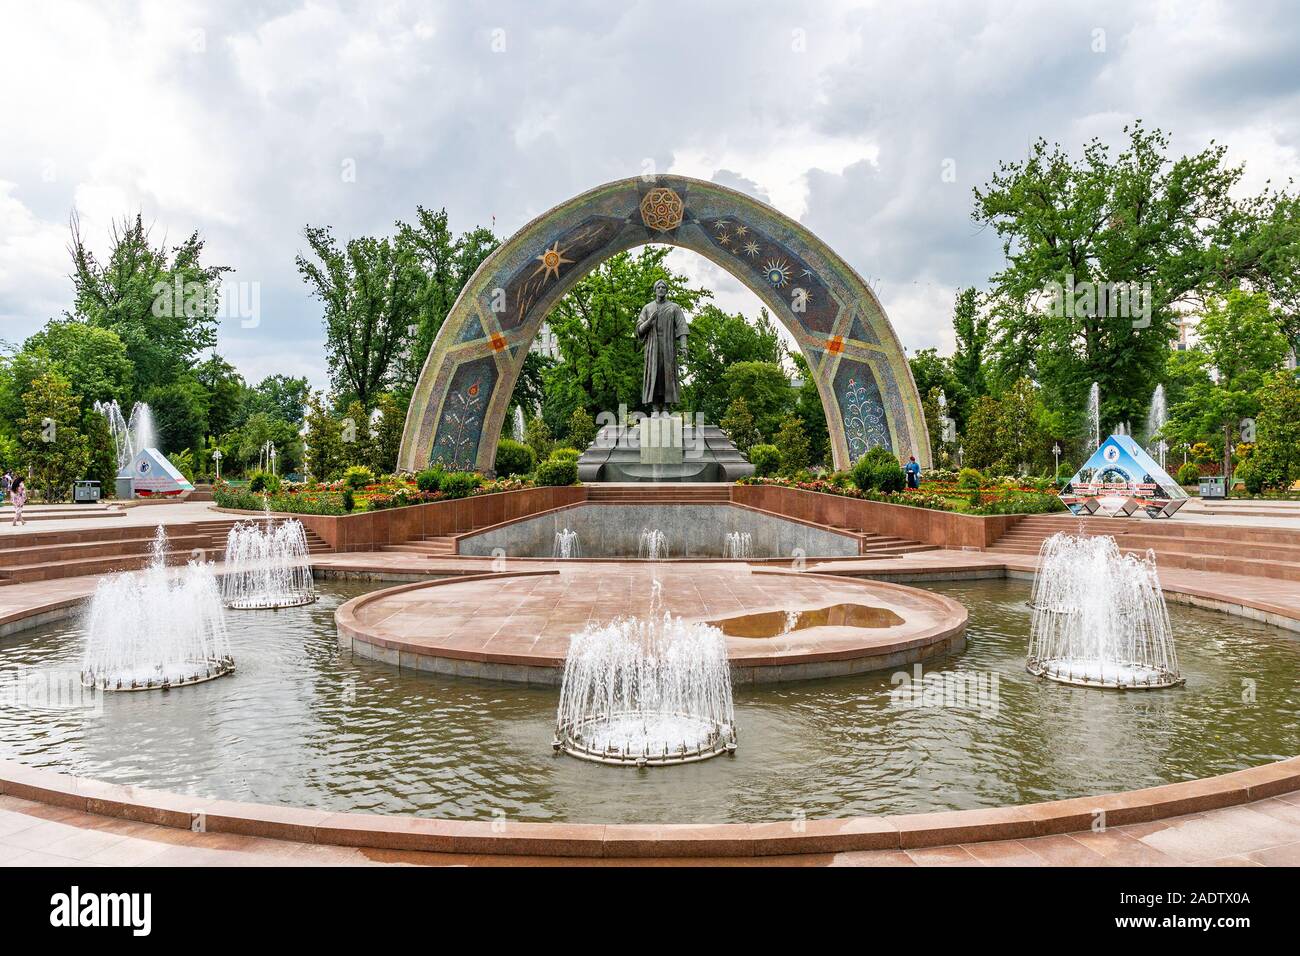 Dushanbe Abu Abdullah Rudaki Park Statue Picturesque View with Fountain on a Cloudy Rainy Day Stock Photo